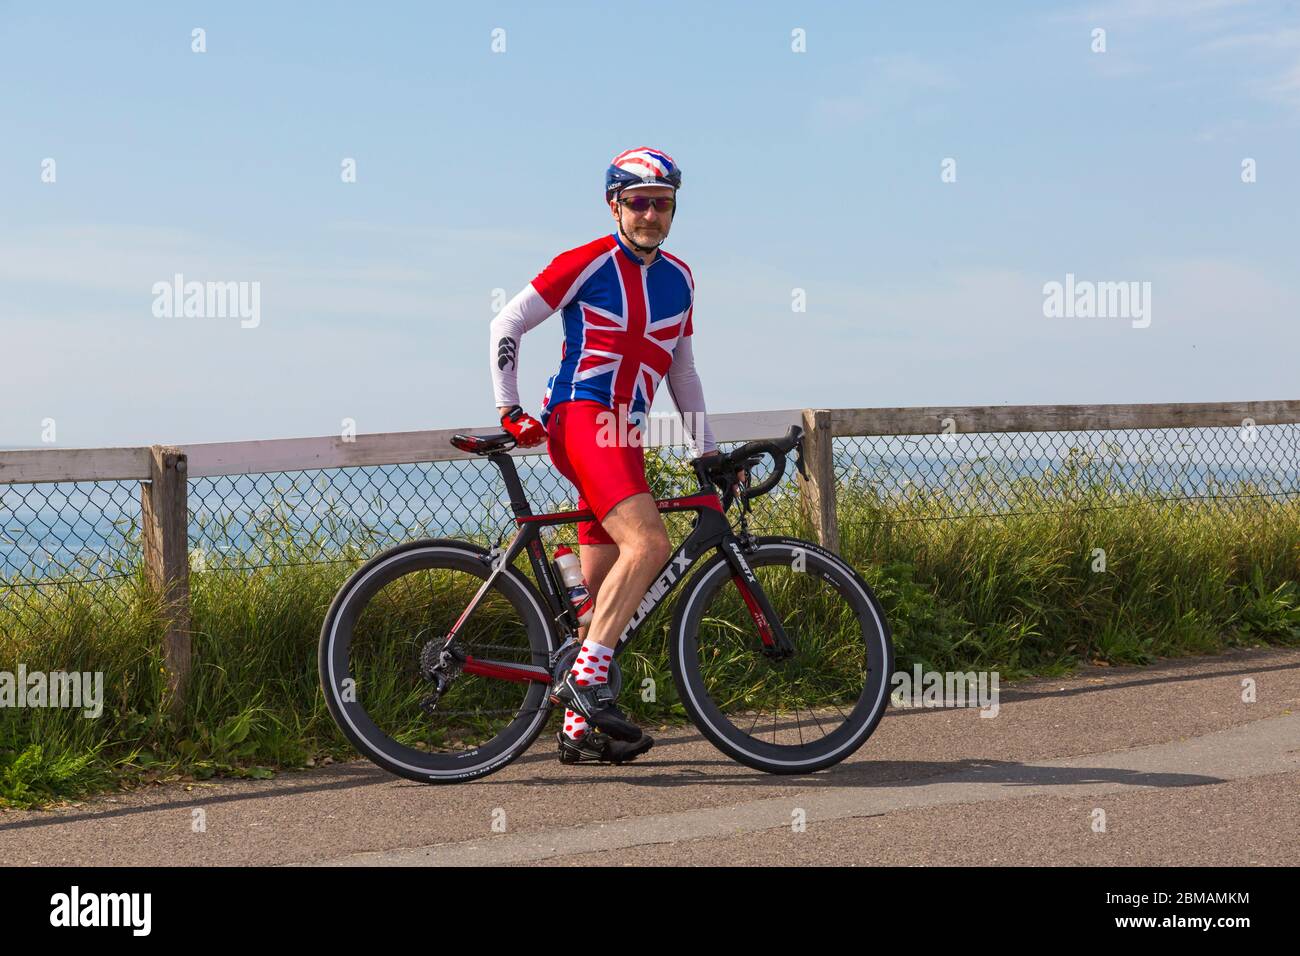 Bournemouth, Dorset UK. 8th May 2020. Nick shows his support  to celebrate VE day 75th Anniversary wearing red white and blue Union Jack clothing on his bike ride on a lovely warm sunny day, as organised events are cancelled due to Coronavirus restrictions. Cyclist bike bicycle. Credit: Carolyn Jenkins/Alamy Live News Stock Photo